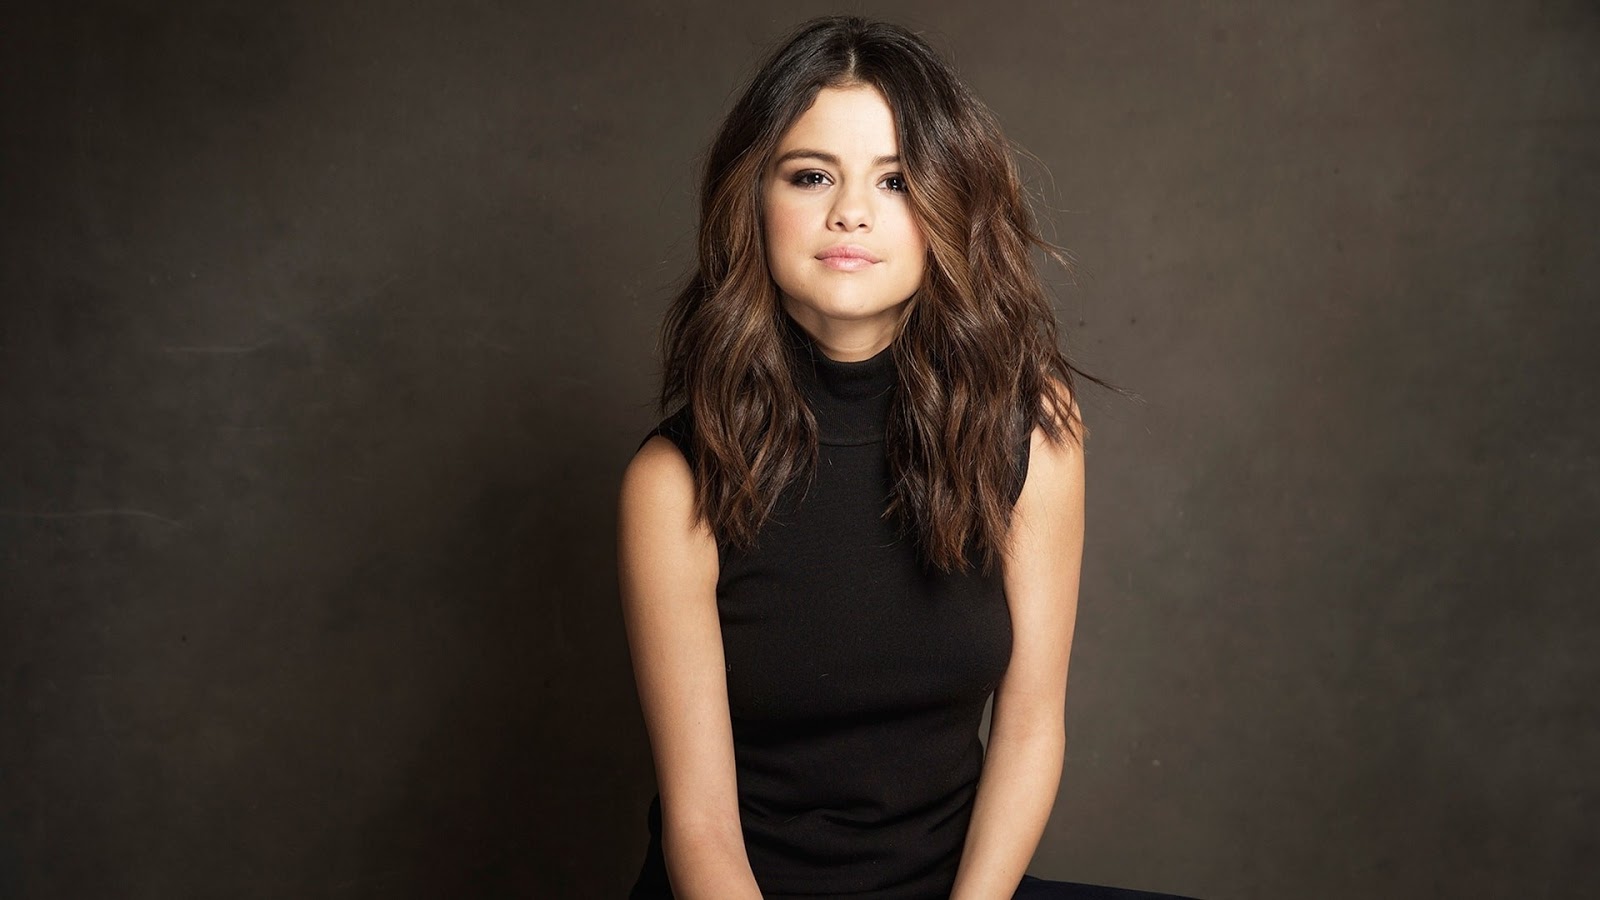 Selena Gomez Salary from Endorsement Deals: Went to Increments In Net Worth